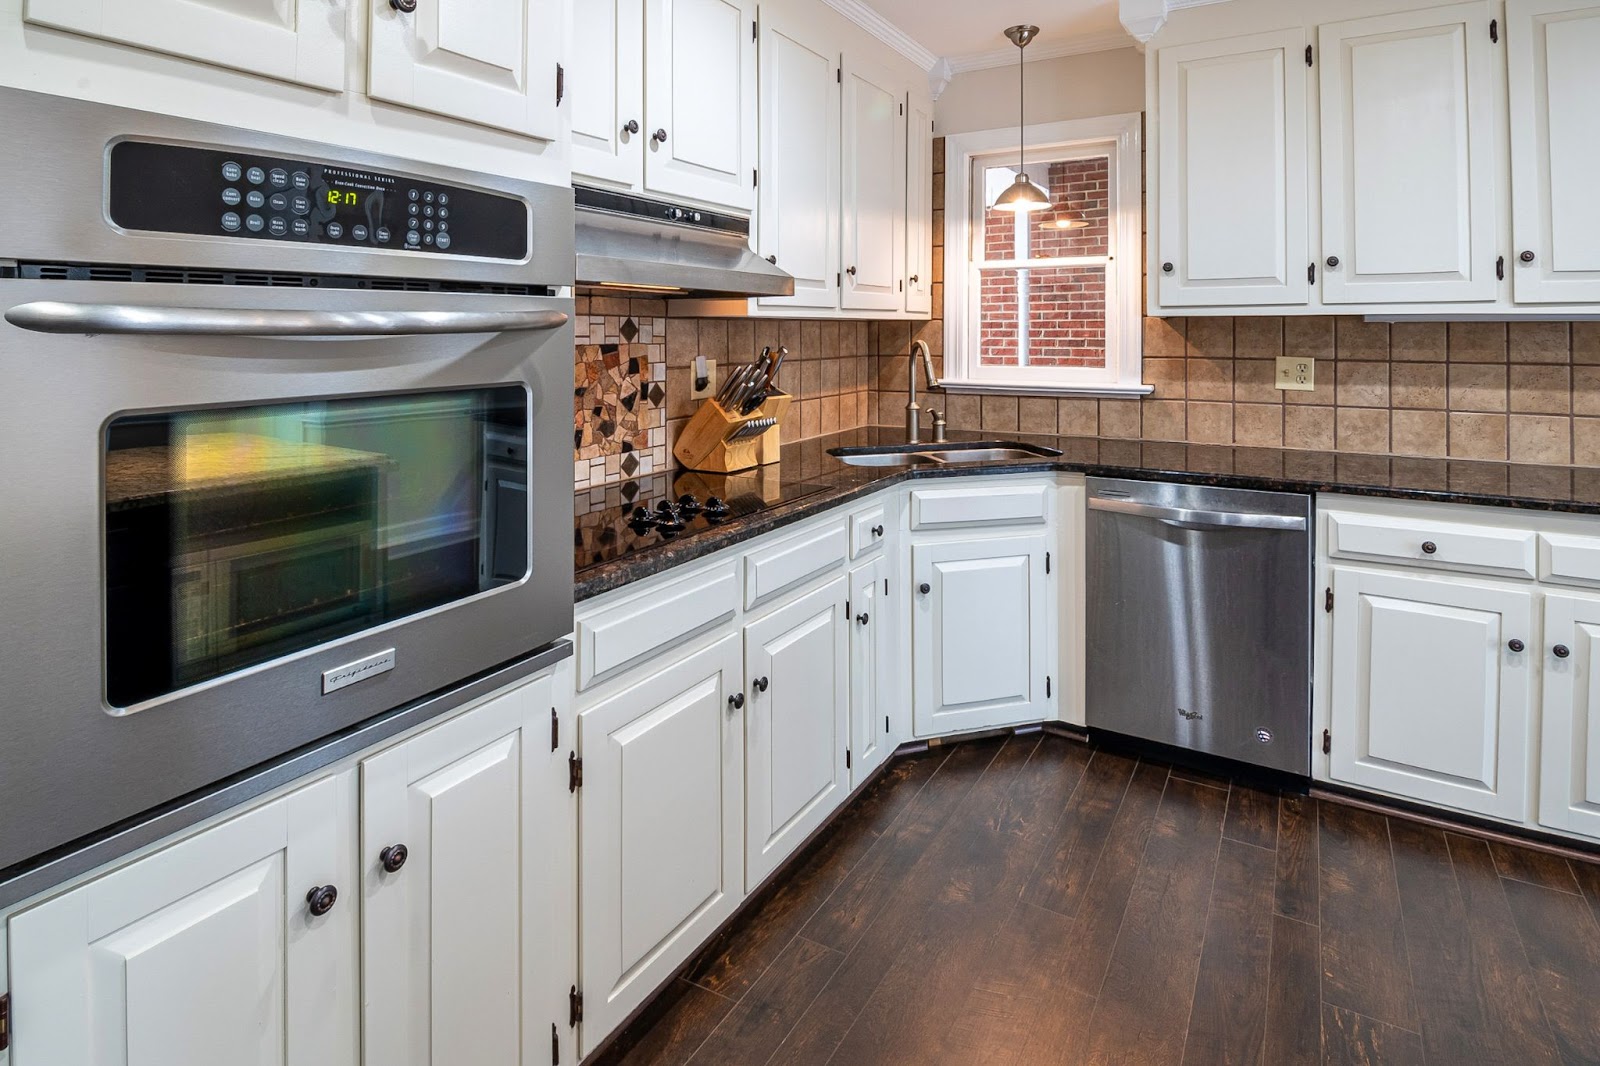 The link between clean appliances and healthy home environments